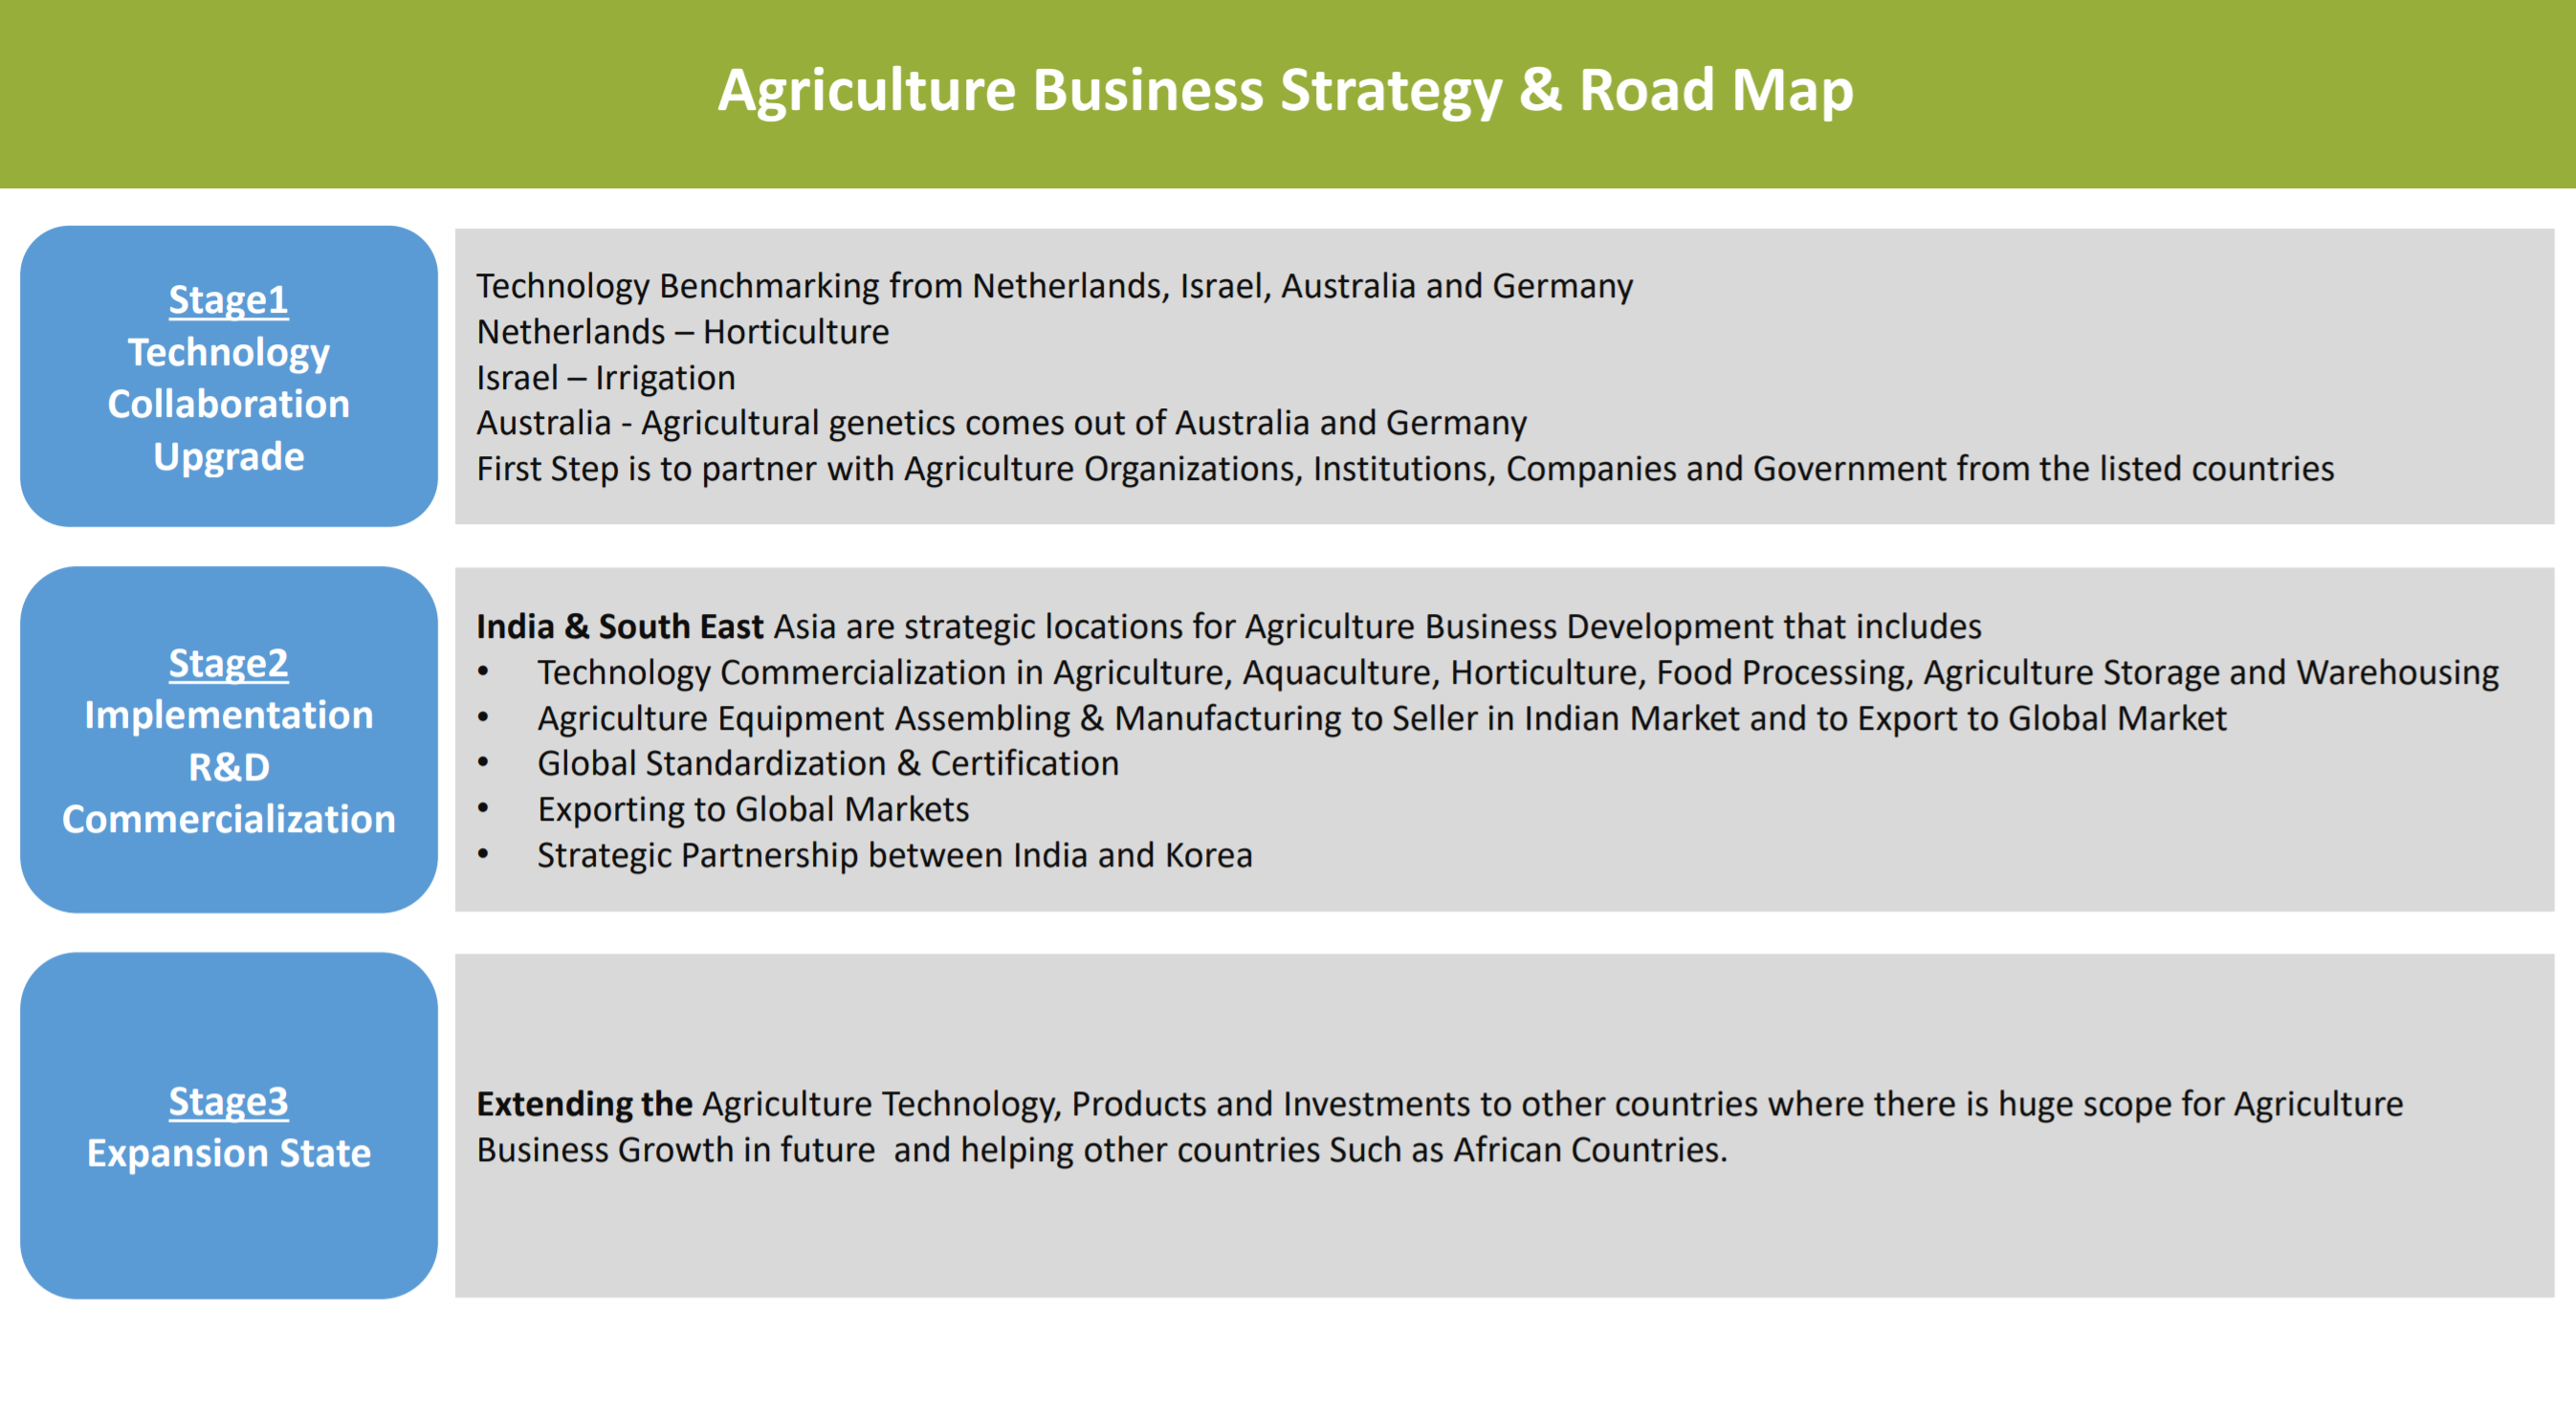 Agriculture Business Strategy & Road Map